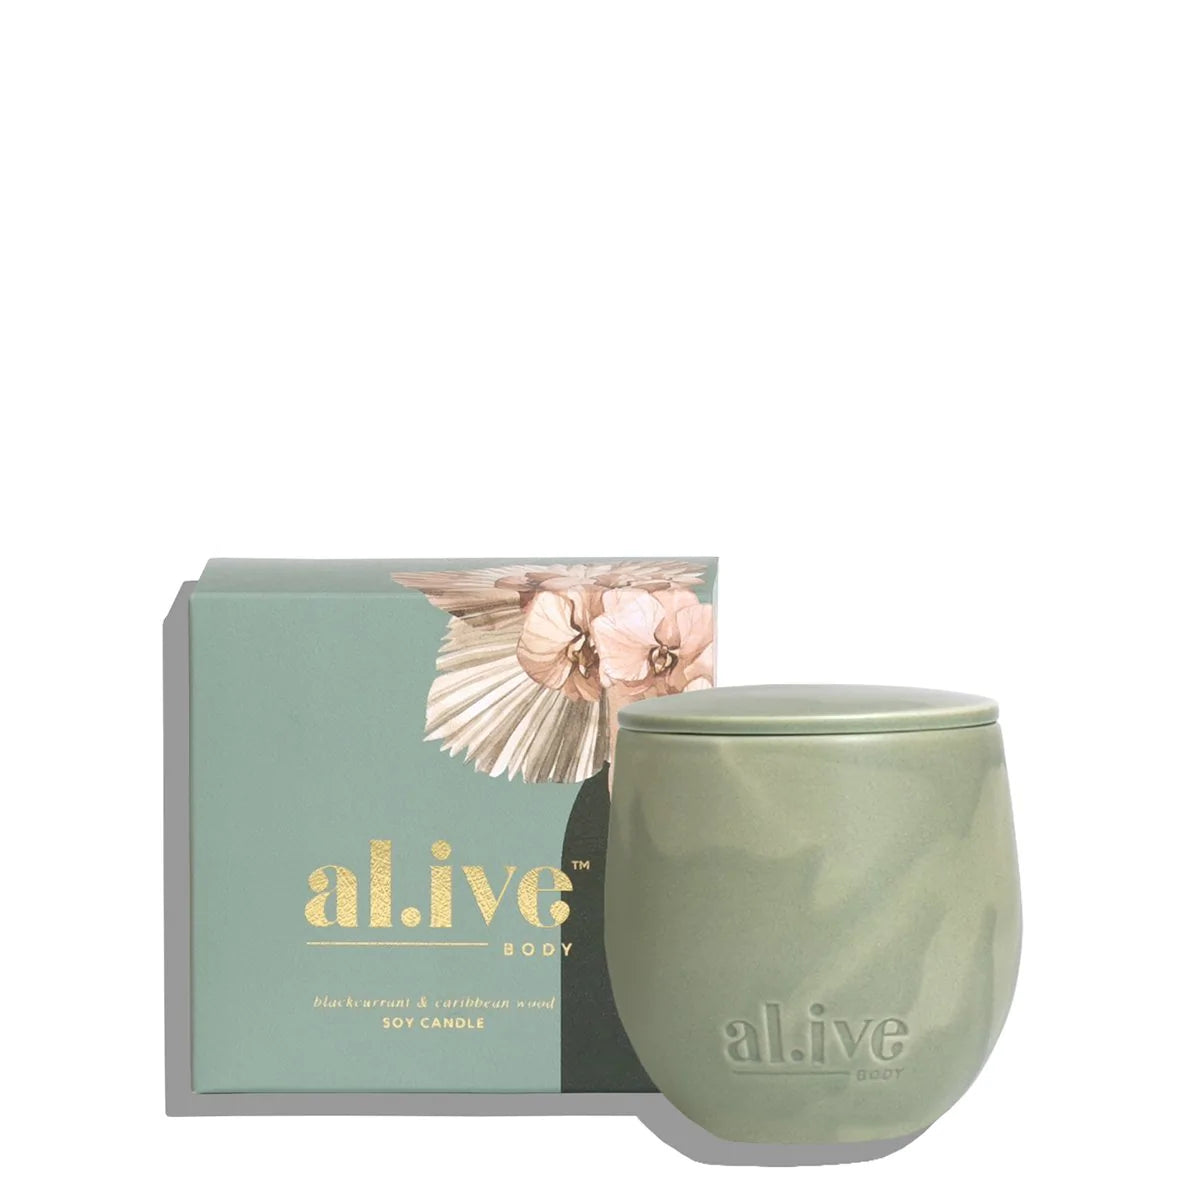 Alive Body Soy Candle - Blackcurrant & Caribbean Wood 295g